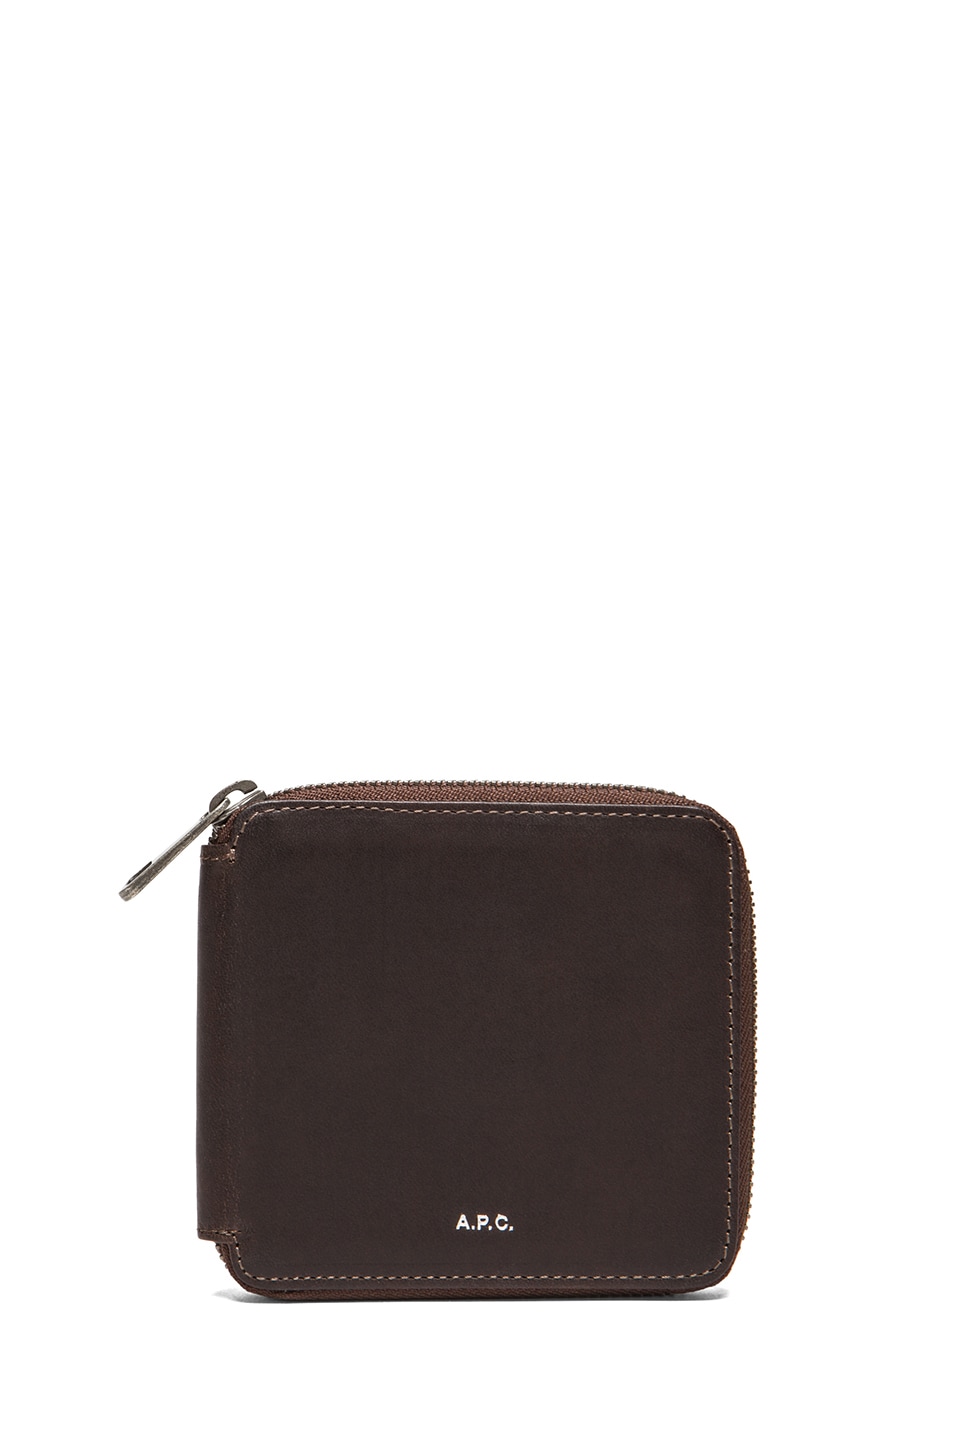 Image 1 of A.P.C. Compact Wallet in Marron Fonce